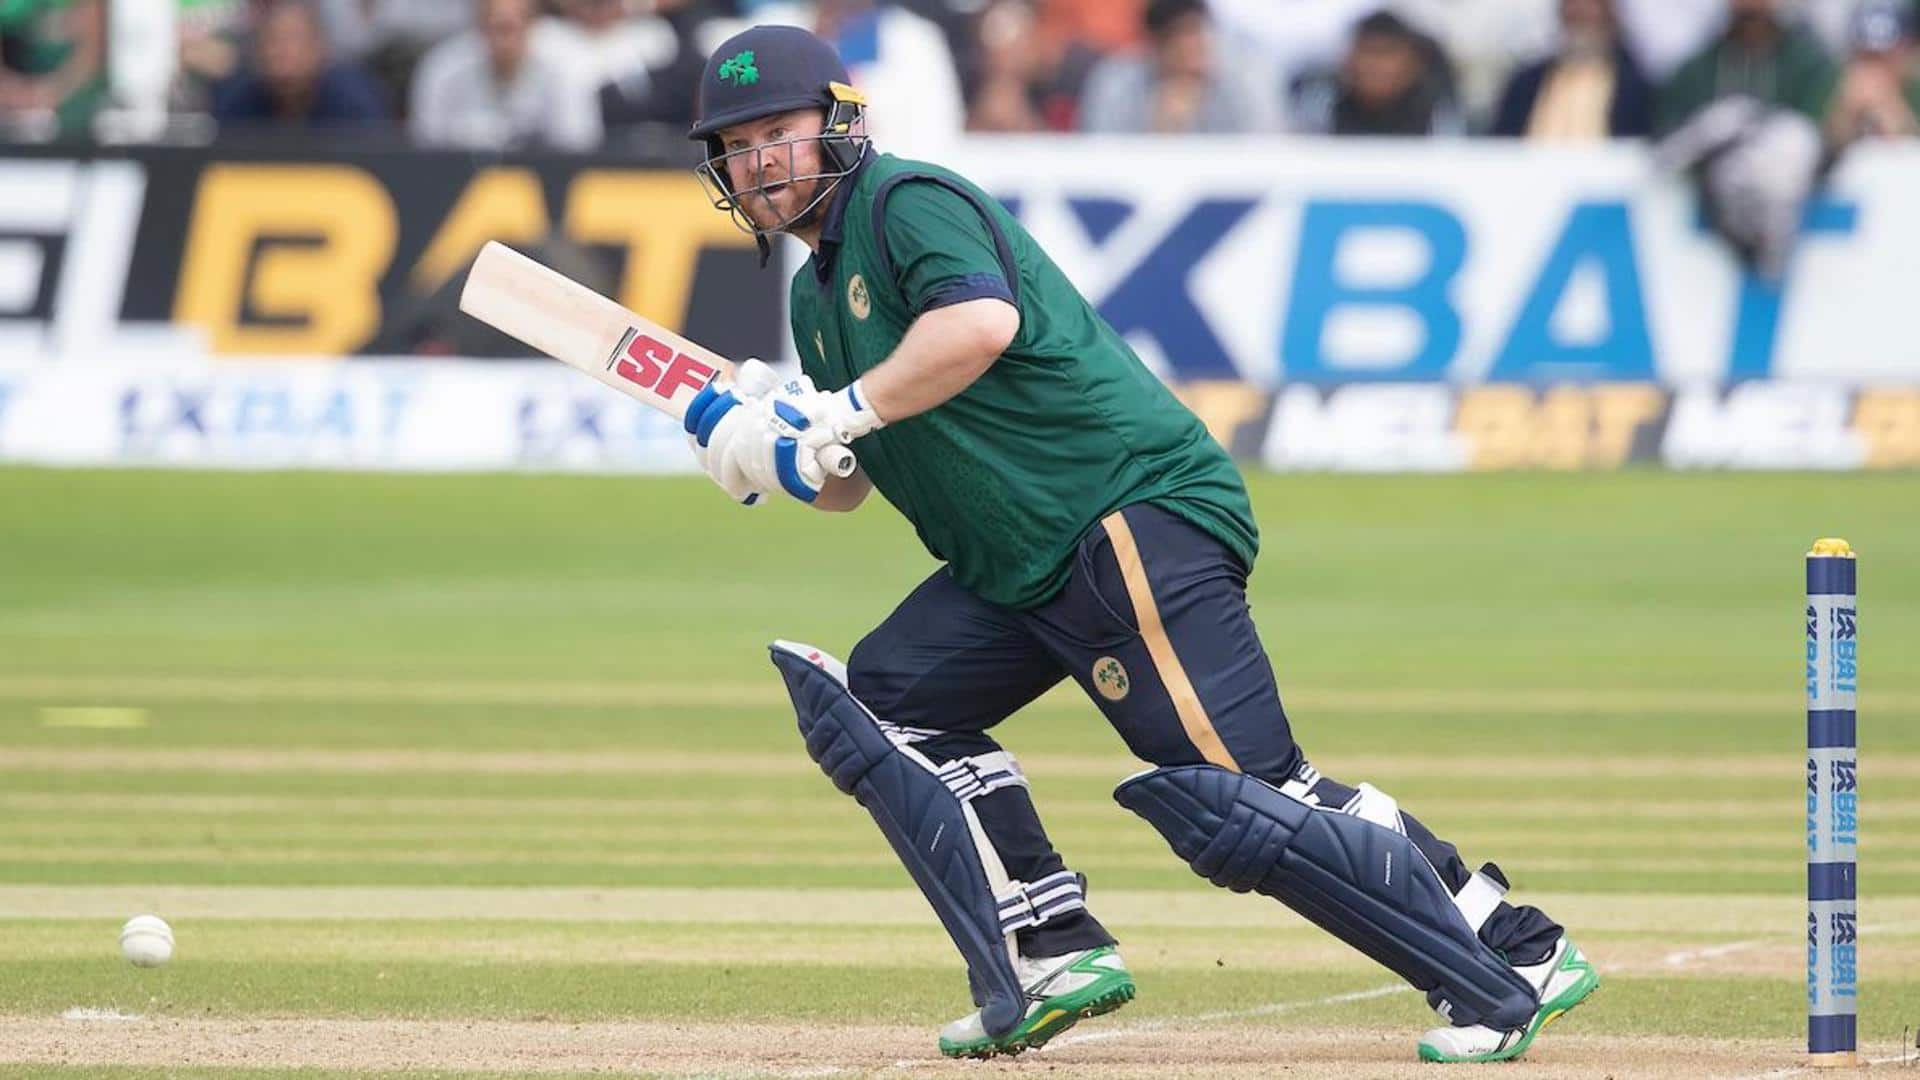 IRE vs BAN: Paul Stirling slams his 27th ODI fifty